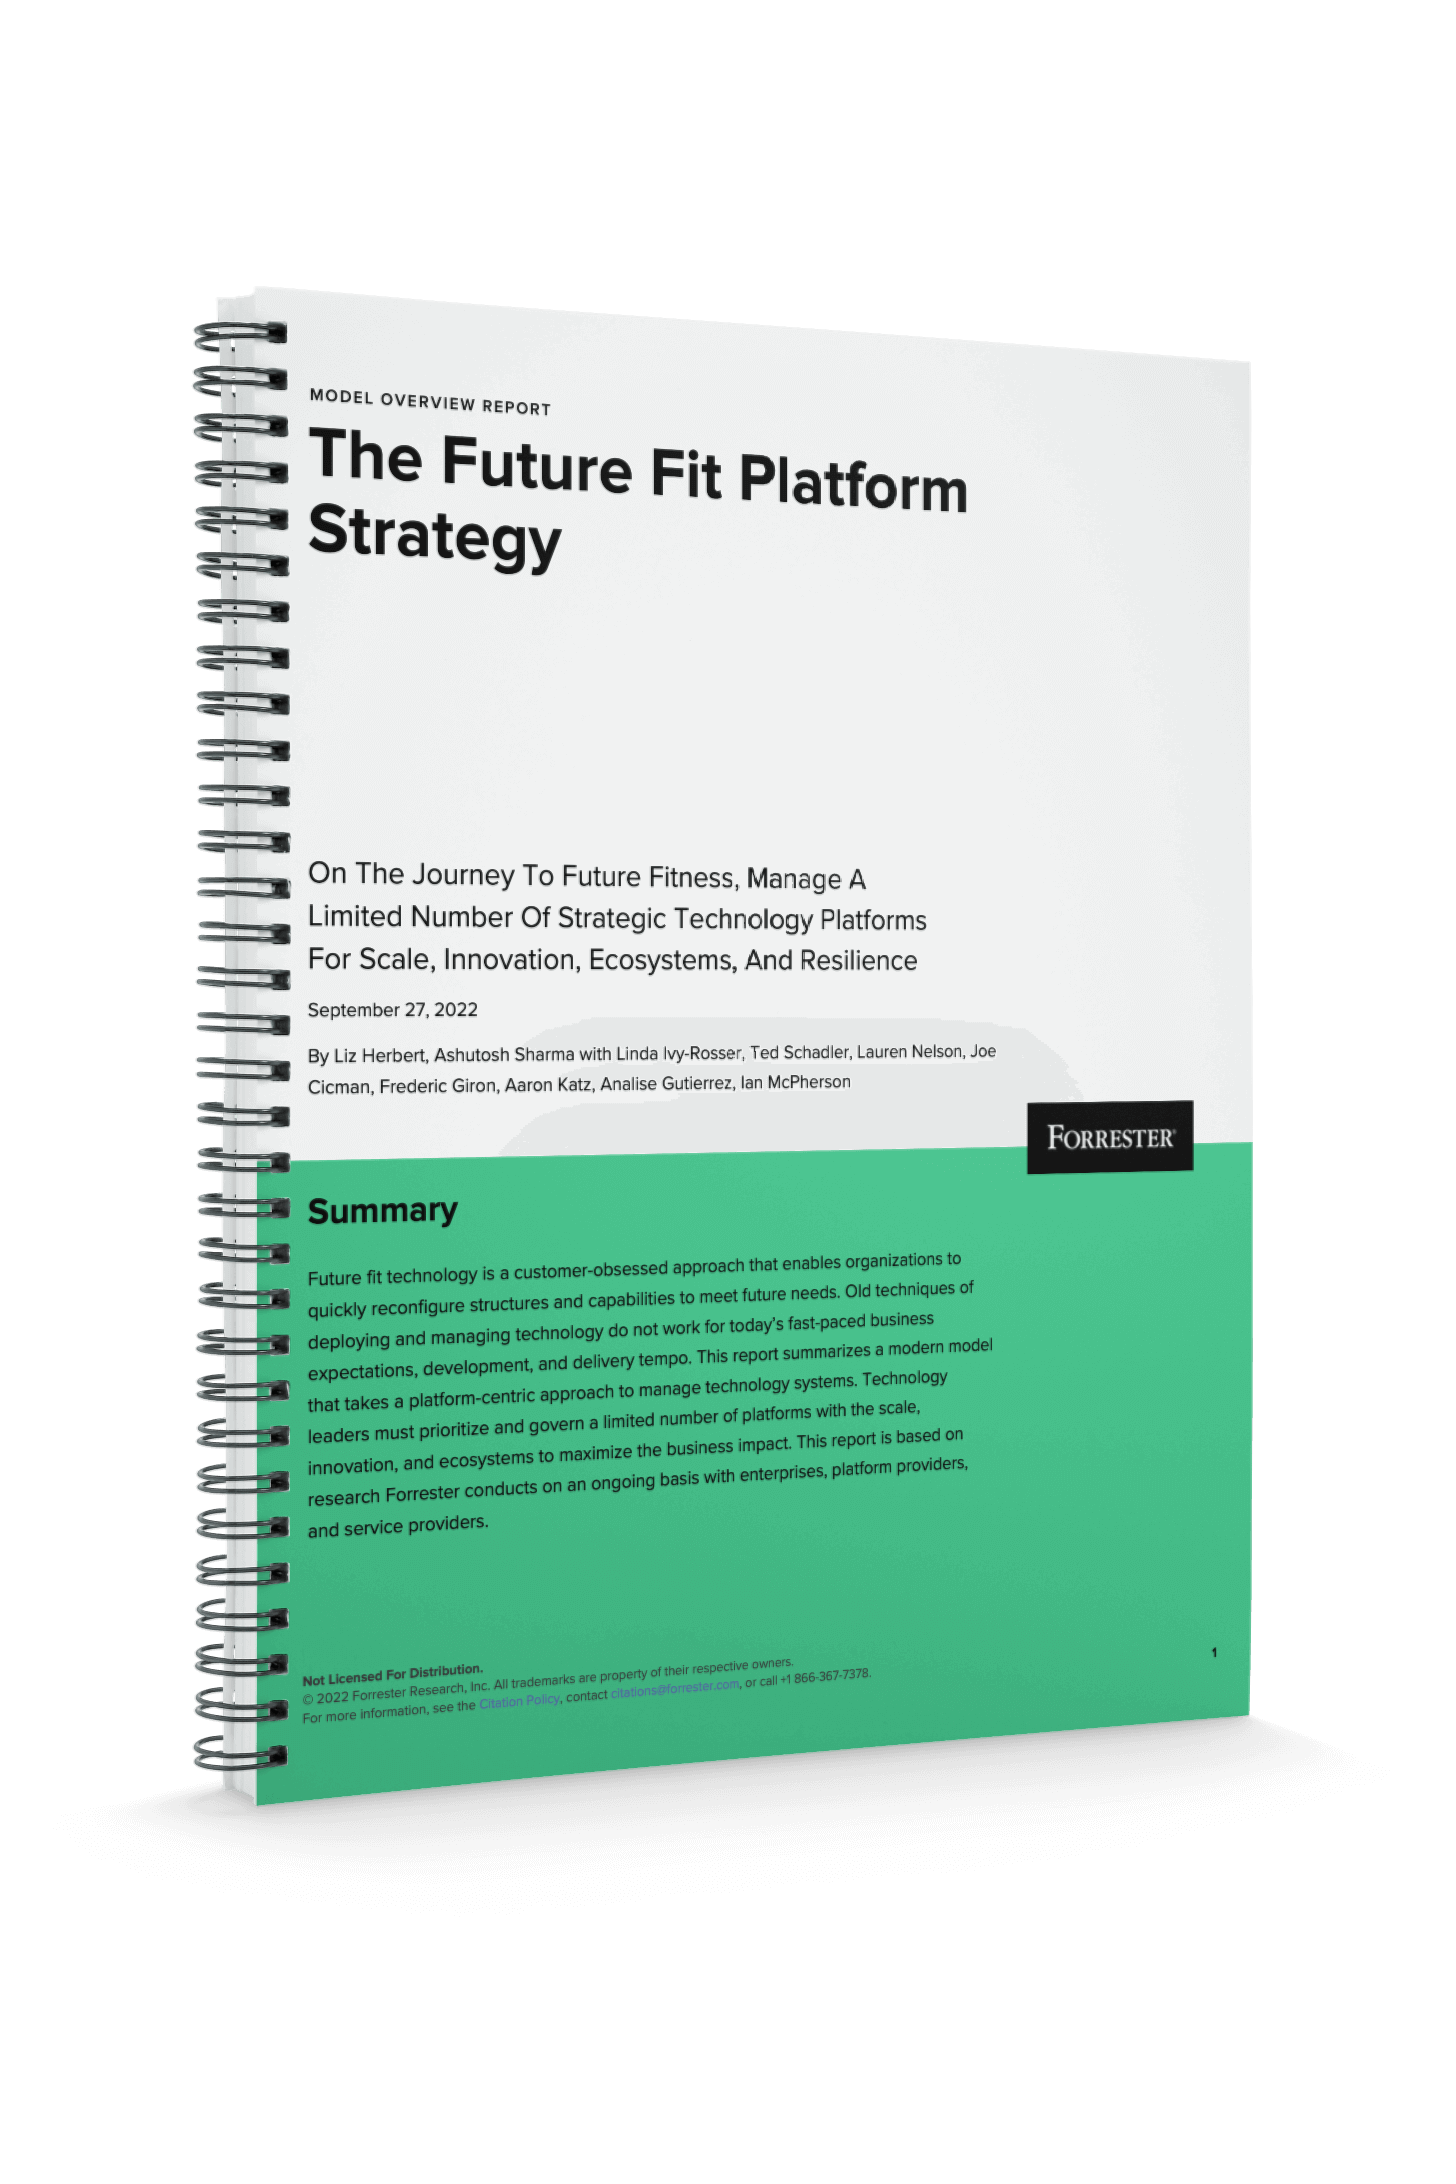 The-Future-Fit-Platform-Strategy ebook cover